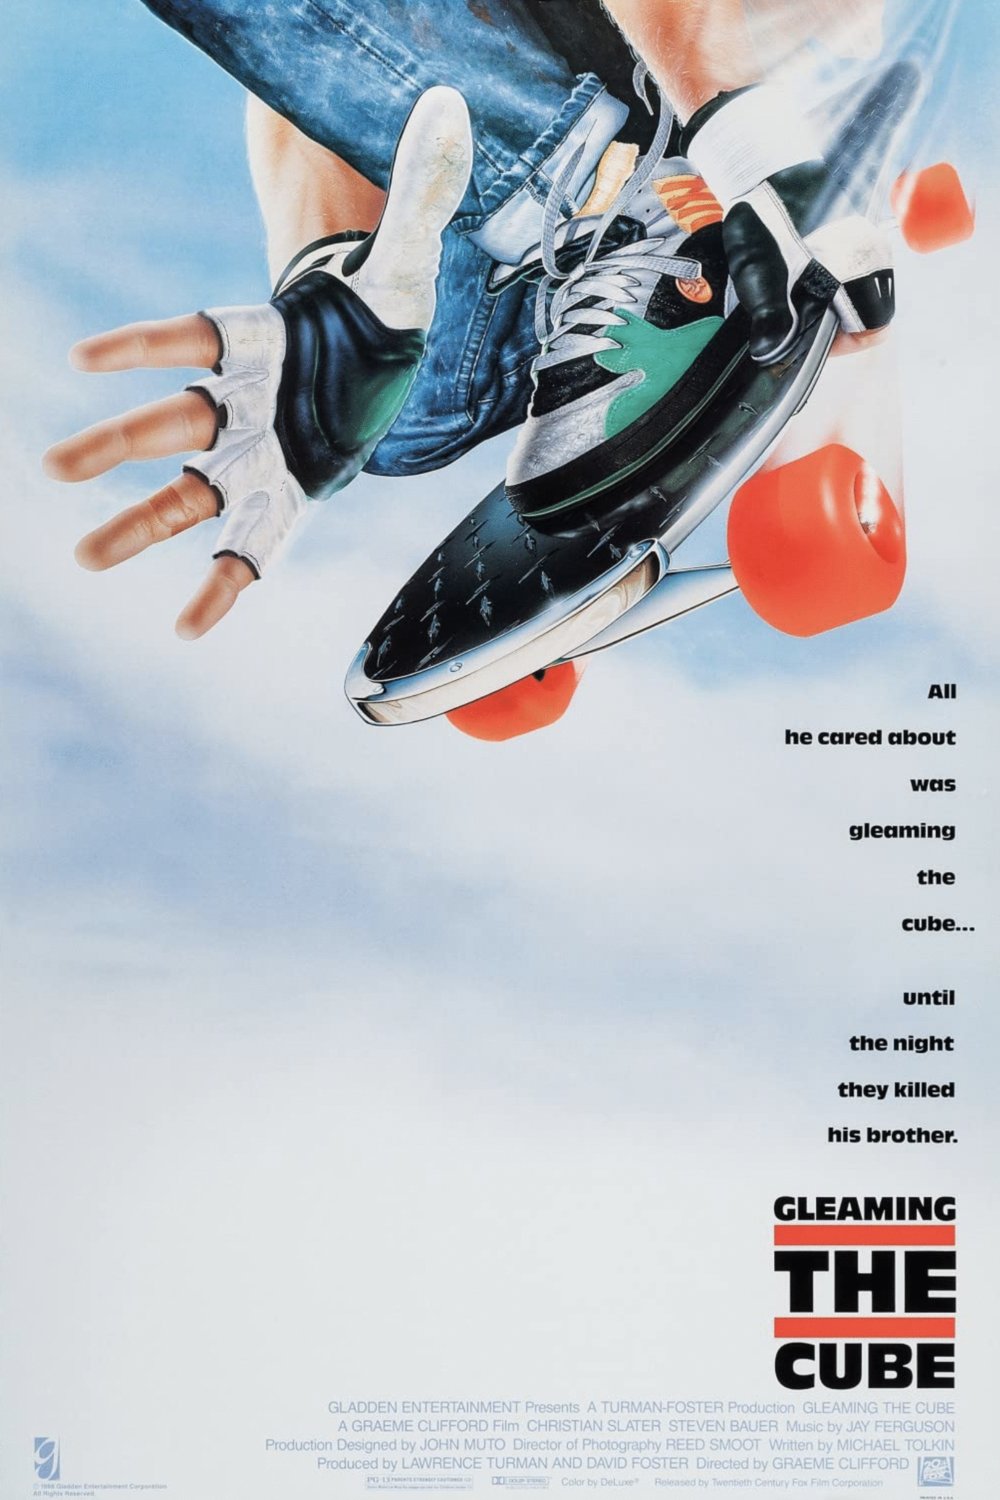 Poster of the movie Gleaming the Cube